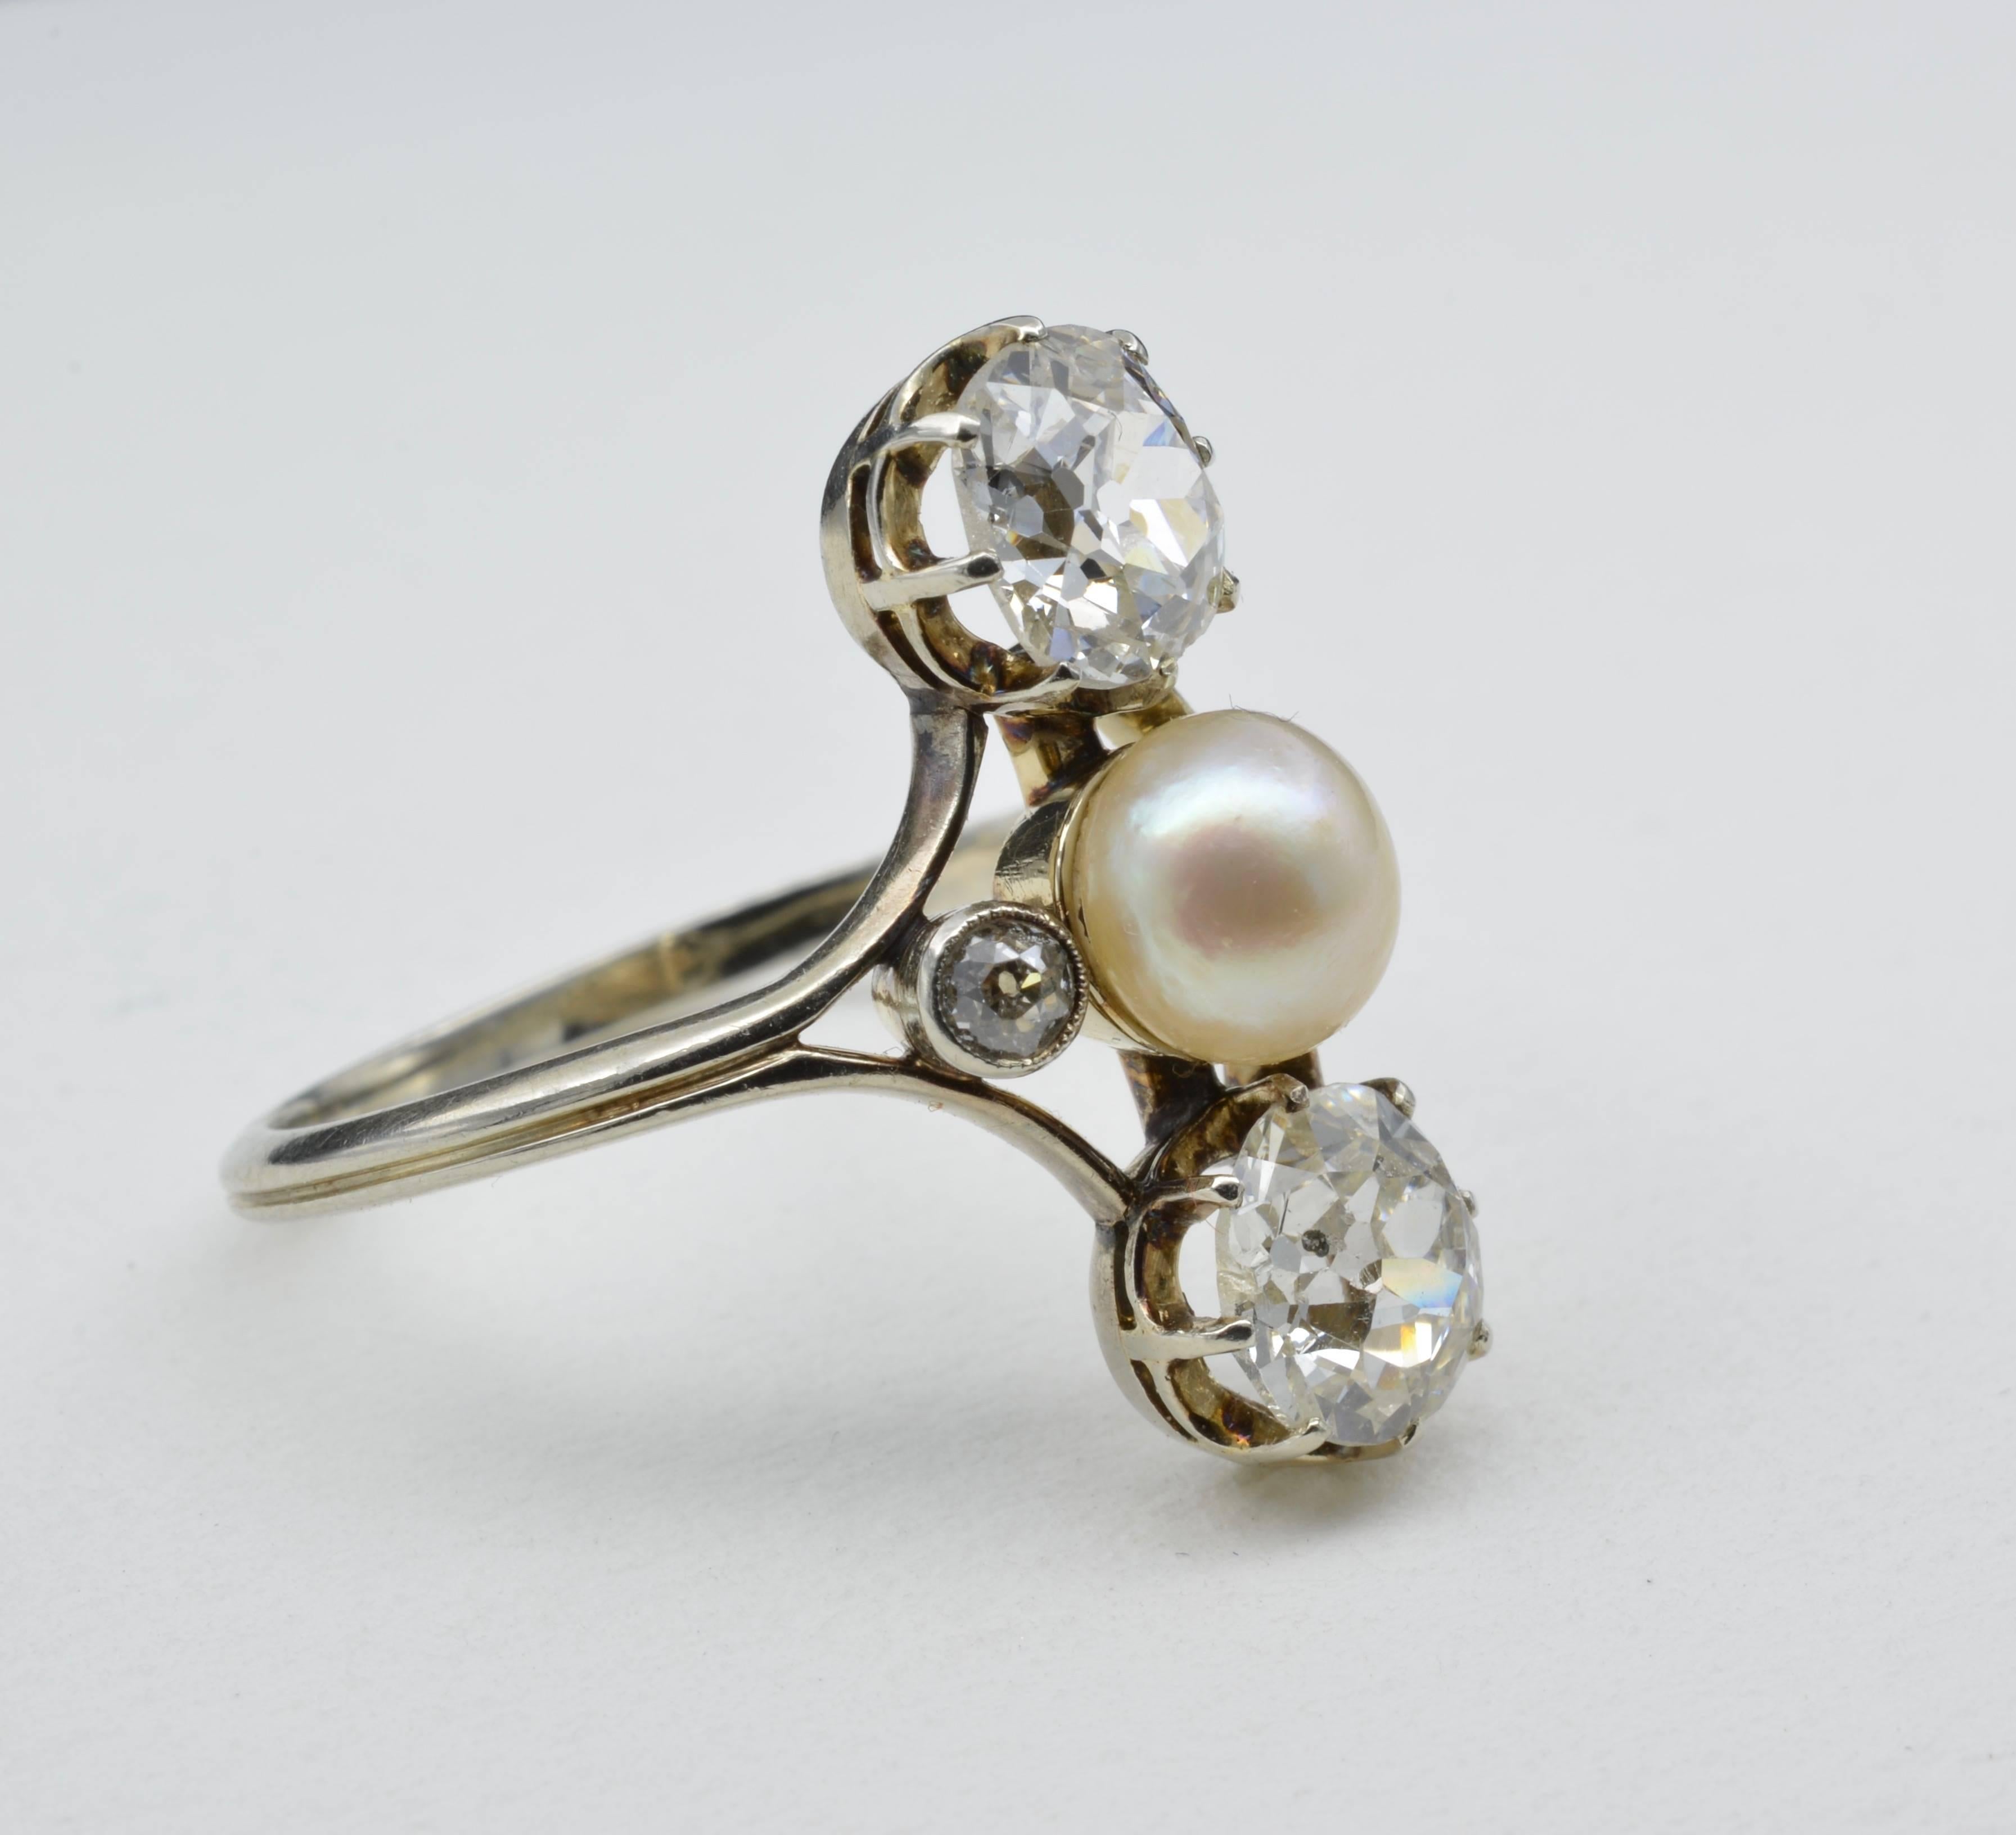 This exquisite ring is from the 1910 Napoleon the III Empire Era and is in a Josephine style. Two superb old mine cut diamonds have a total weight of 2.4 carats and has a central 6.4 mm pearl. There are two accent diamonds which create an allure of